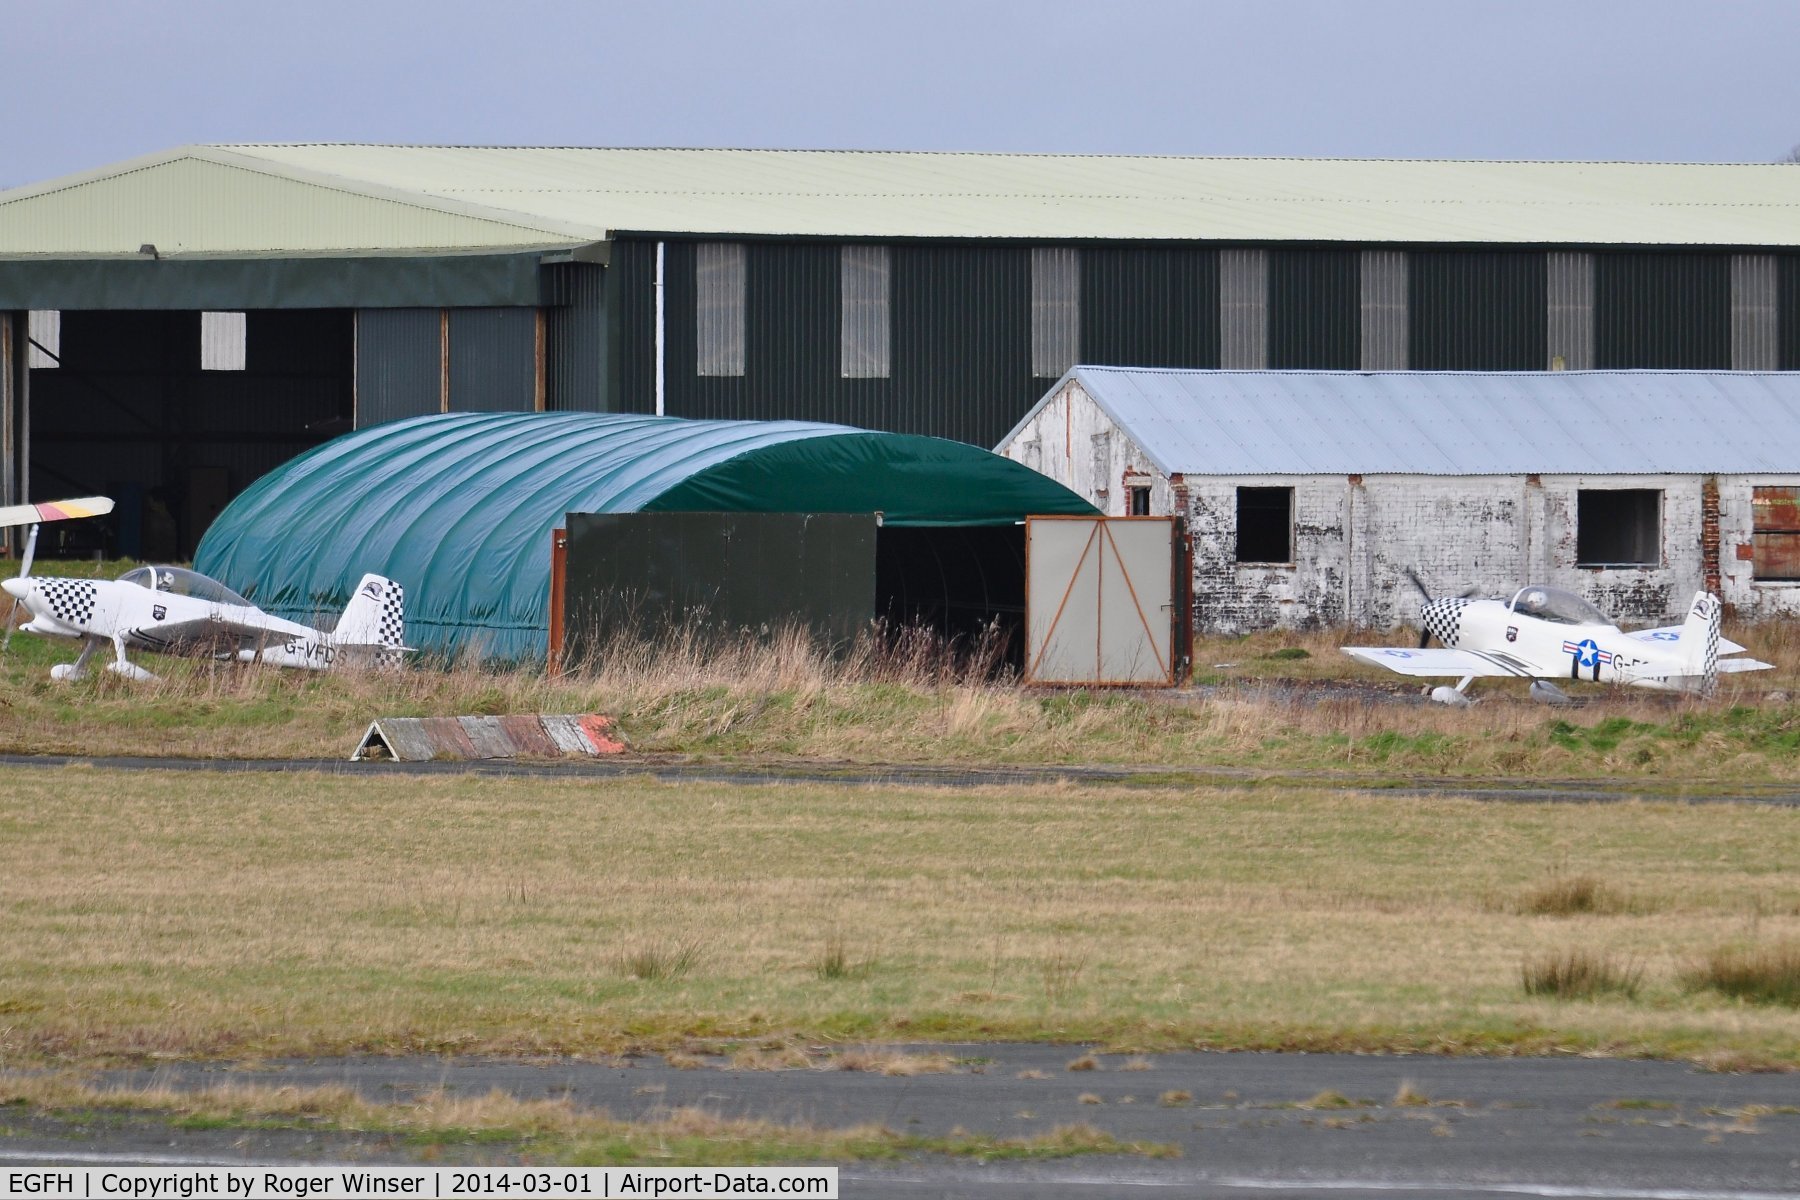 Swansea Airport, Swansea, Wales United Kingdom (EGFH) - Recently erected hangar to house Vans aircraft including two RV-8's of Team Raven formation aerobatic team. G-VFDS and G-EGRV can be seen outside the hangar.